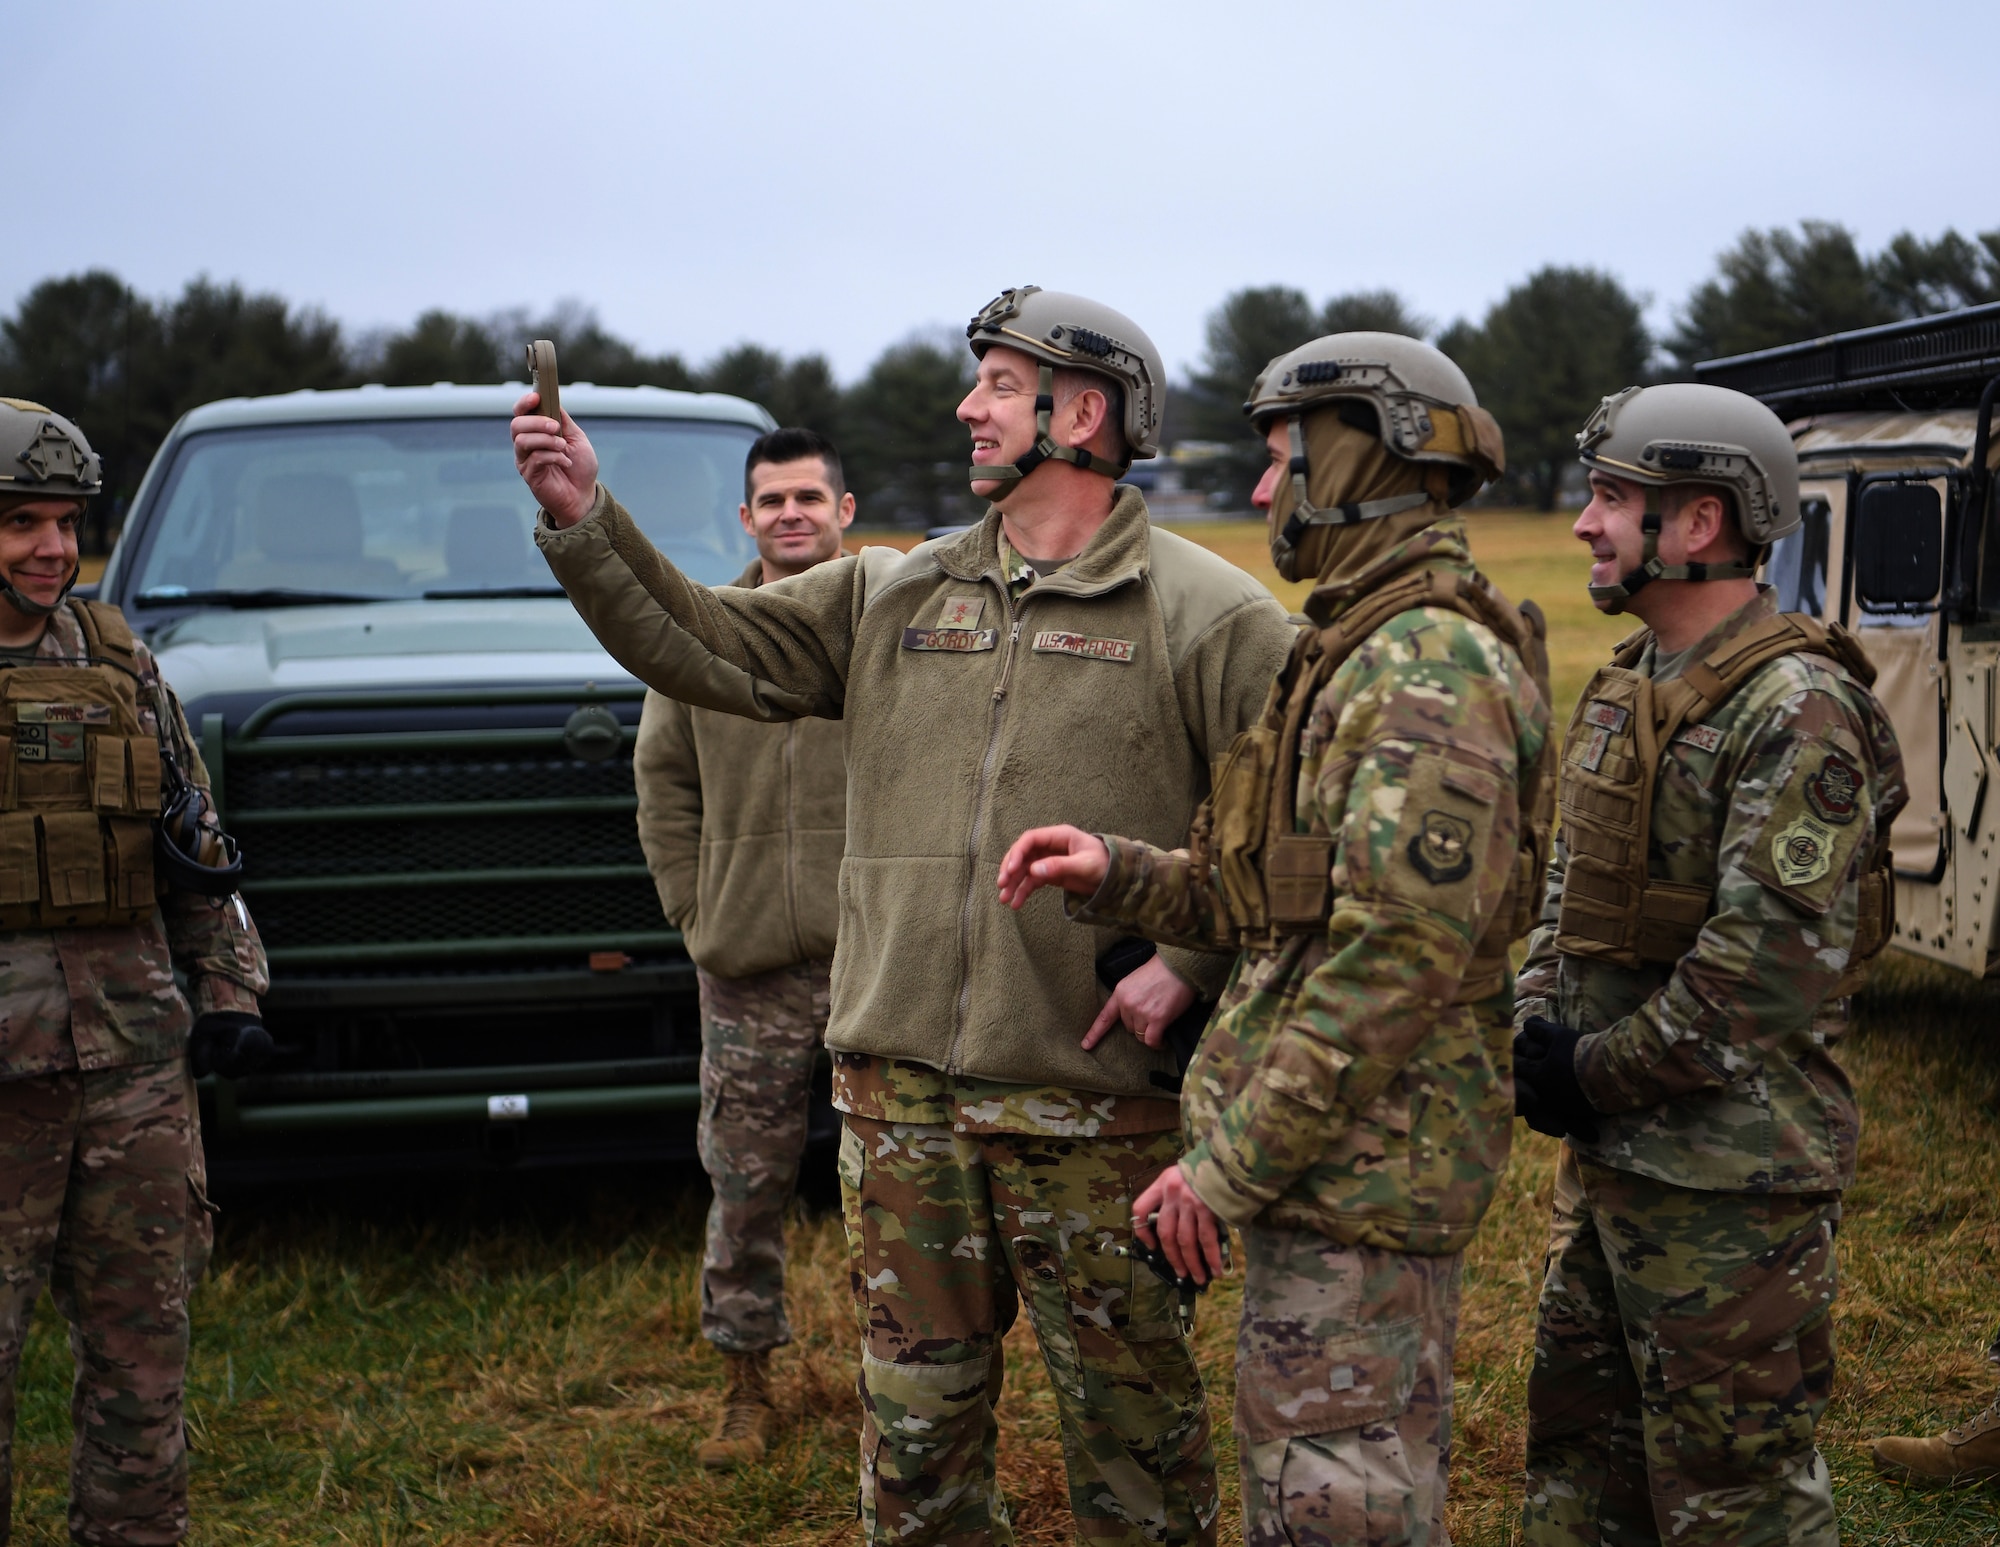 Maj. Gen. John Gordy (center), U.S. Air Force Expeditionary Center commander, handles a weather tracking tool at the Global Deployment Readiness Center Training Field, Joint Base McGuire-Dix-Lakehurst, New Jersey Dec. 17, 2019. Gordy spent the day with 621st Contingency Response Wing Airmen learning various aspects of the CRW mission. (U.S. Air Force photo by Tech. Sgt. Luther Mitchell)